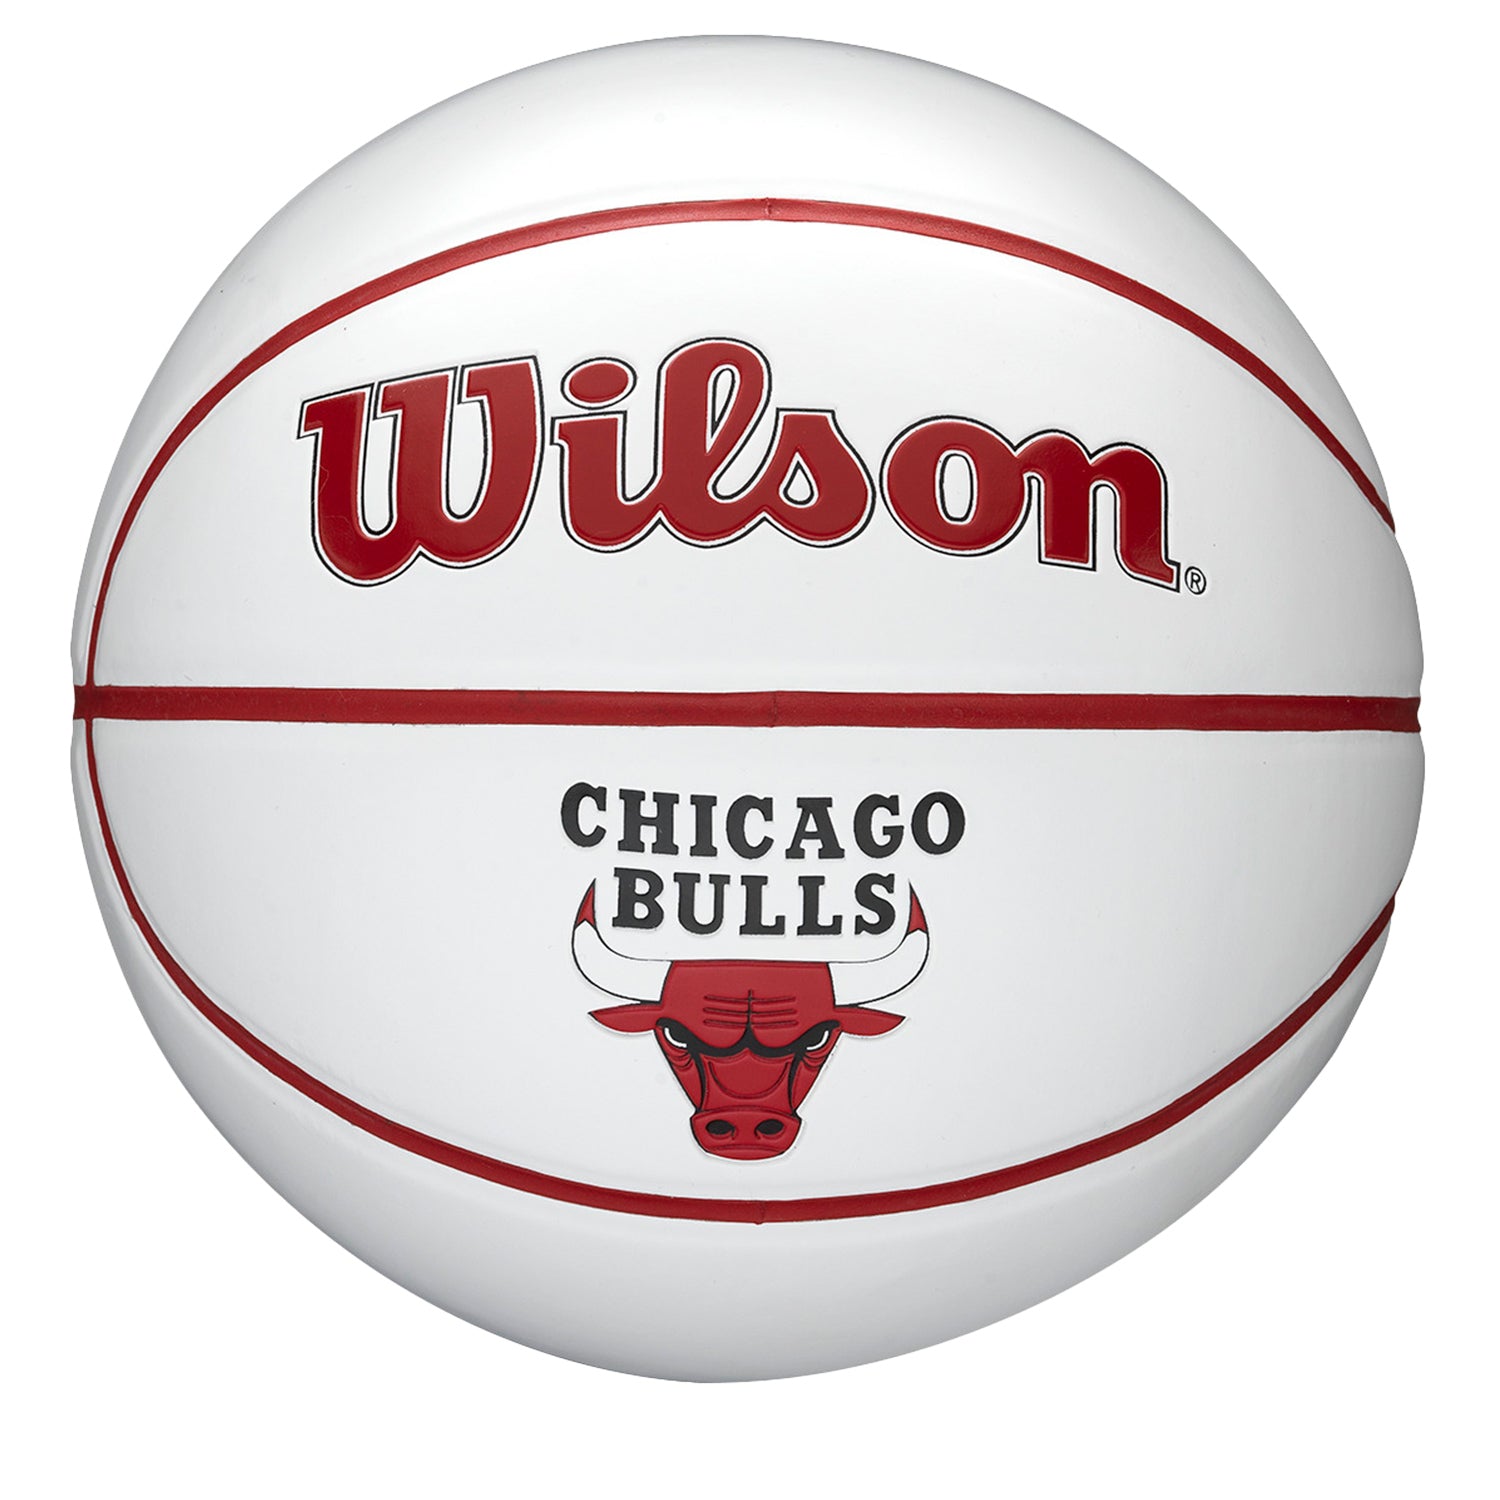 Chicago Bulls Team Autograph Mini Basketball - front view, red and white